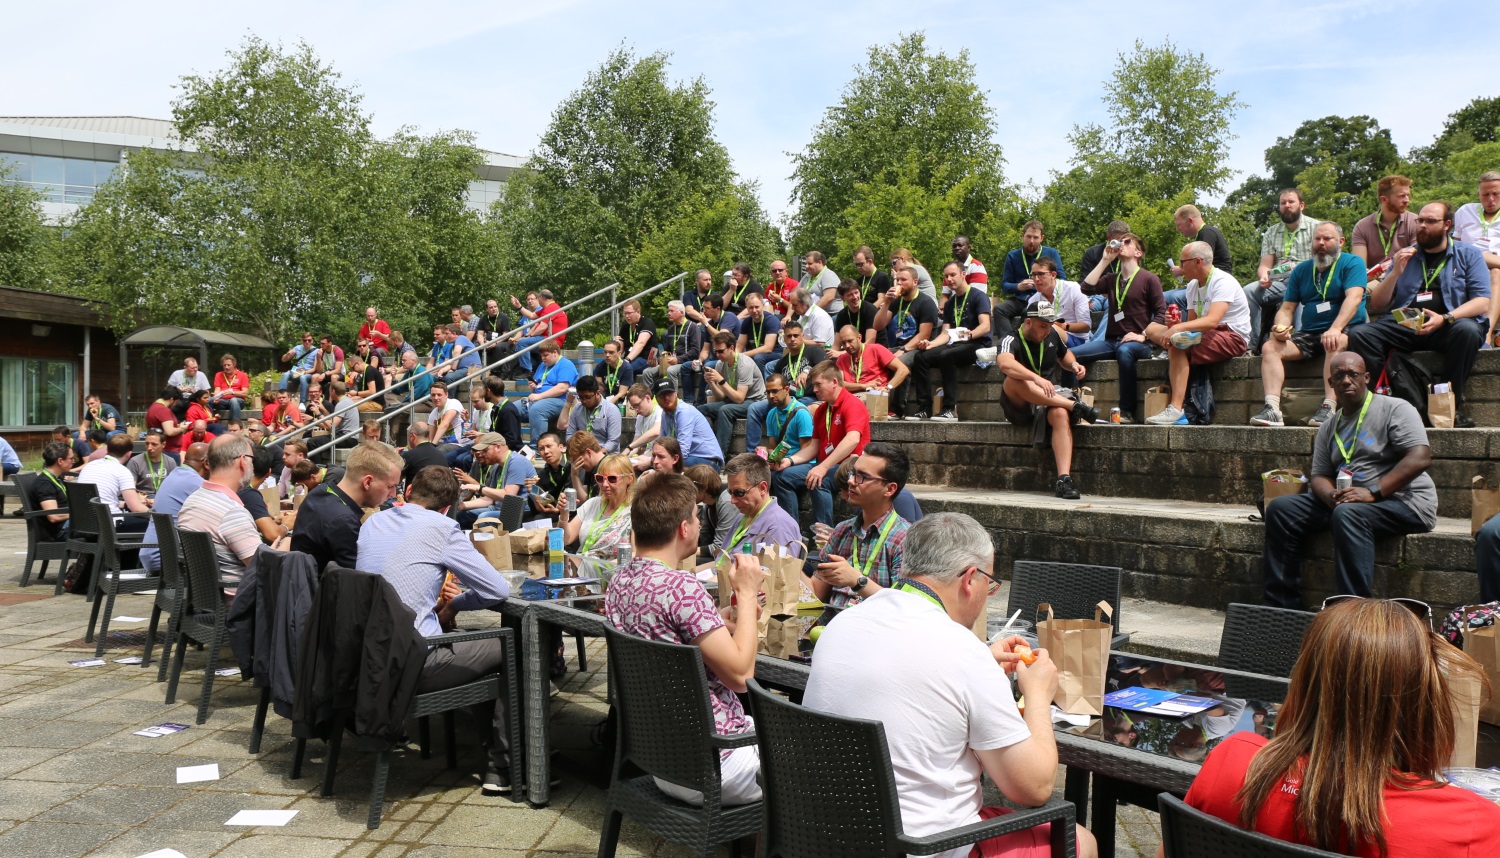 A photo of a large crowd outdoors eating lunch, taken at a previous DDD event.